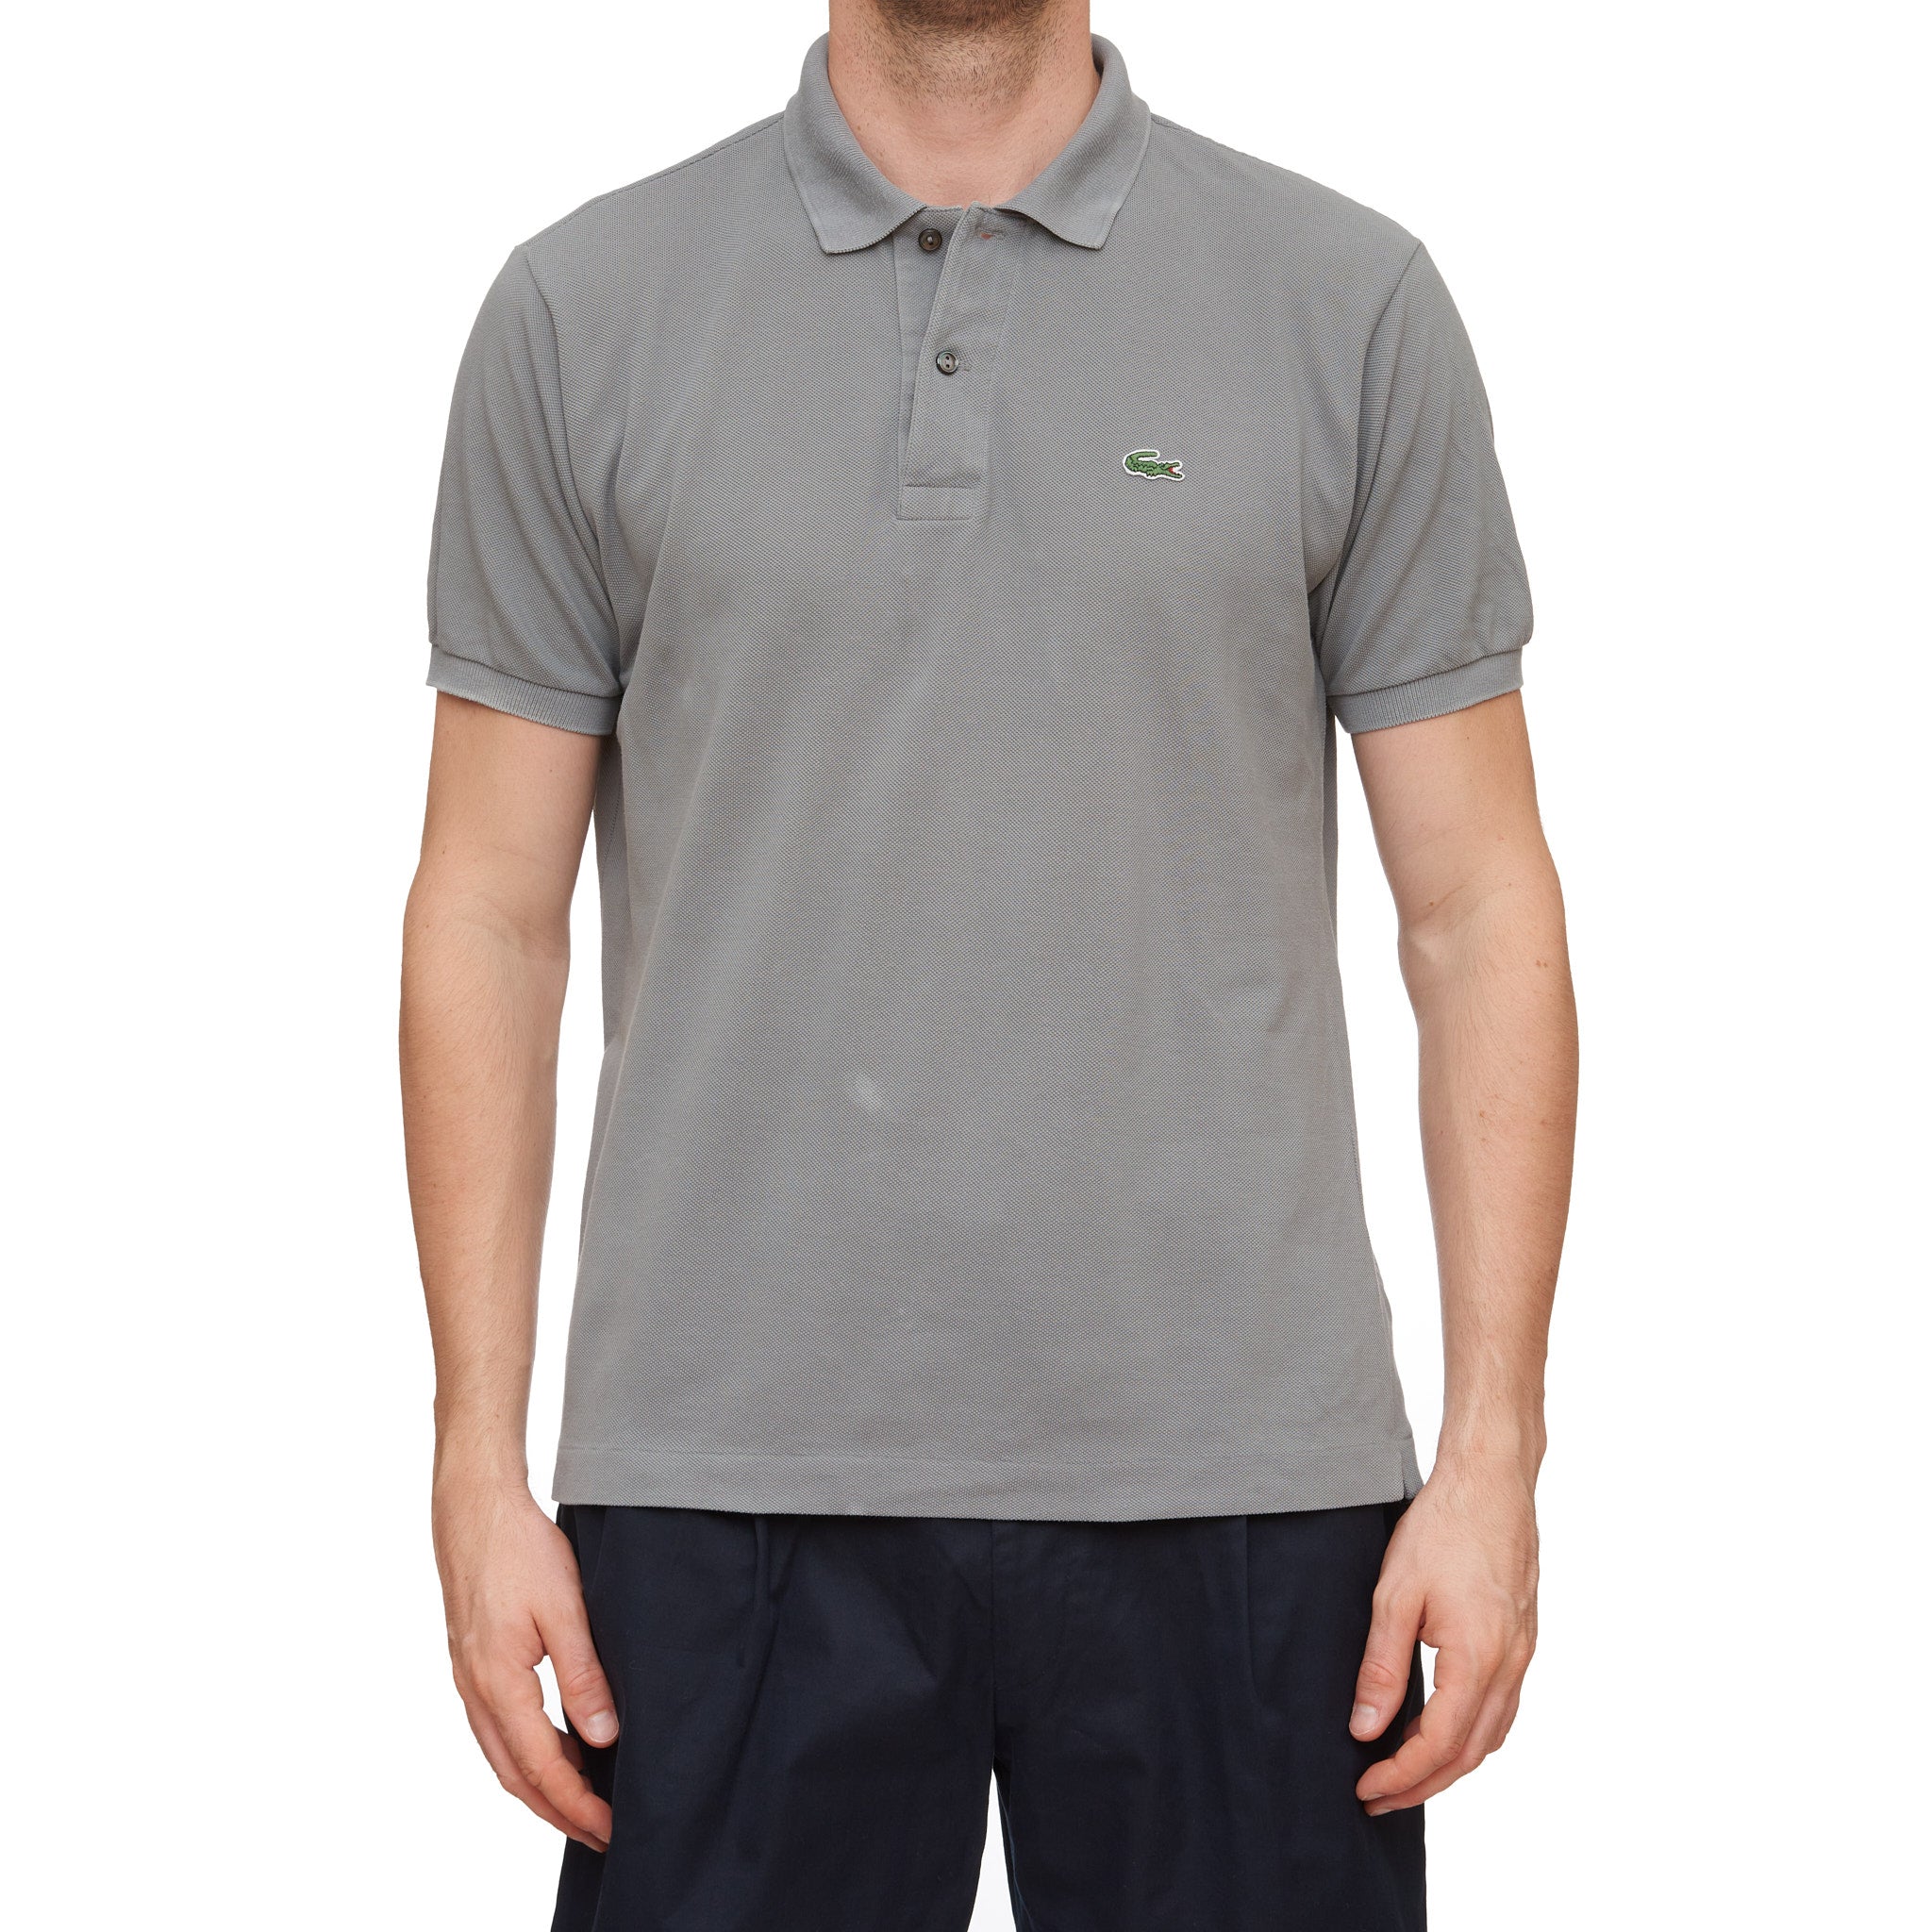 LACOSTE F5191 Devanlay Solid Gray Pique Cotton Short Sleeve Polo FR 4 US M